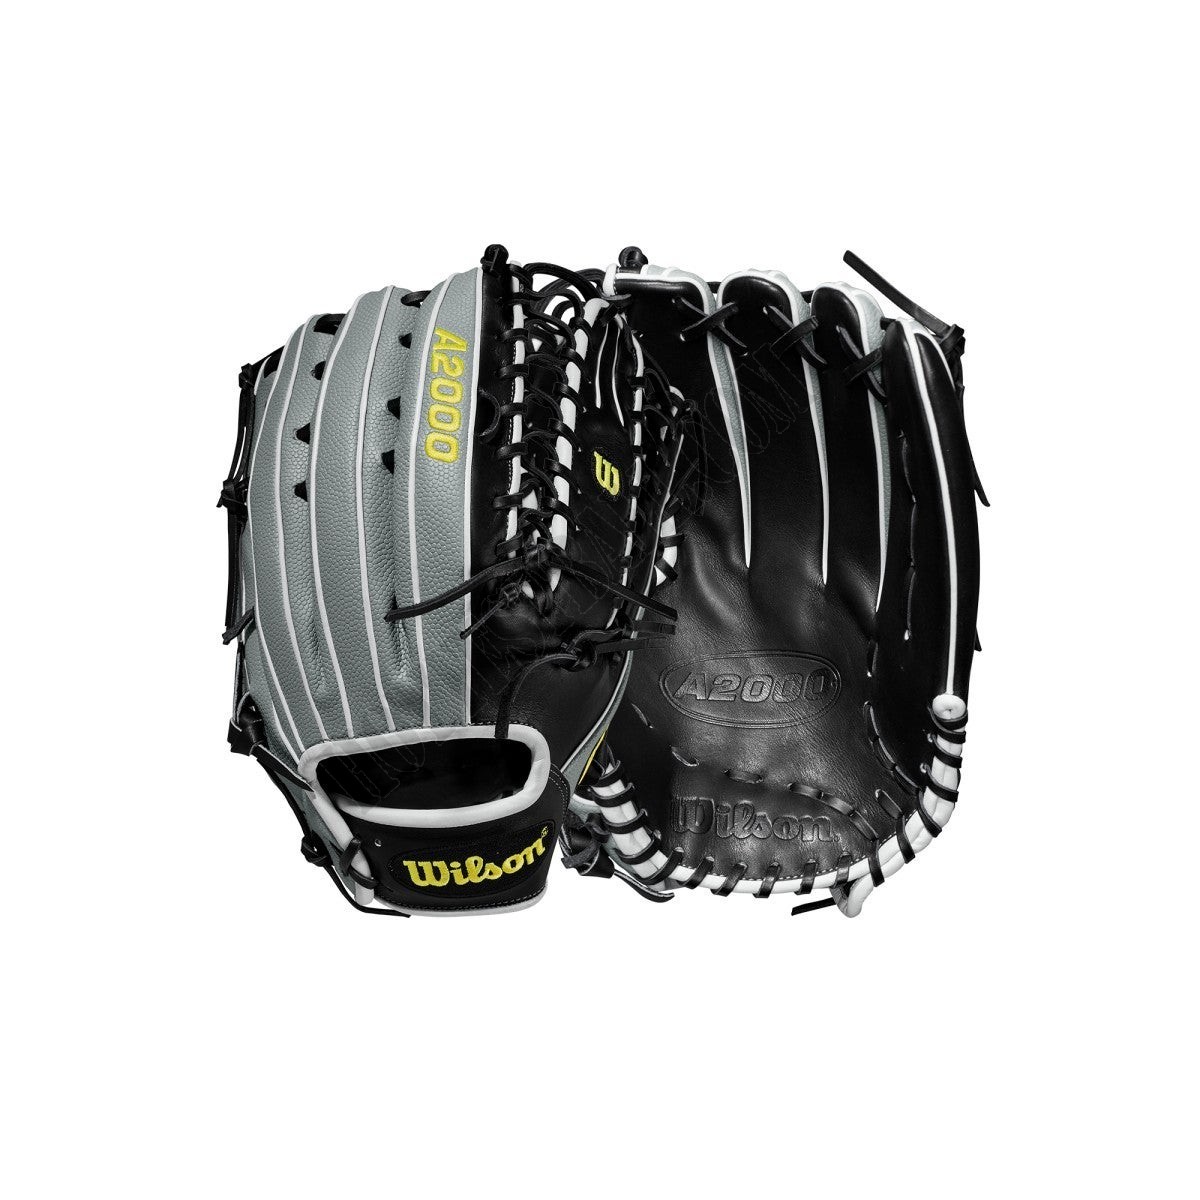 2020 A2000 OT6SS 12.75" Outfield Baseball Glove ● Wilson Promotions - -0